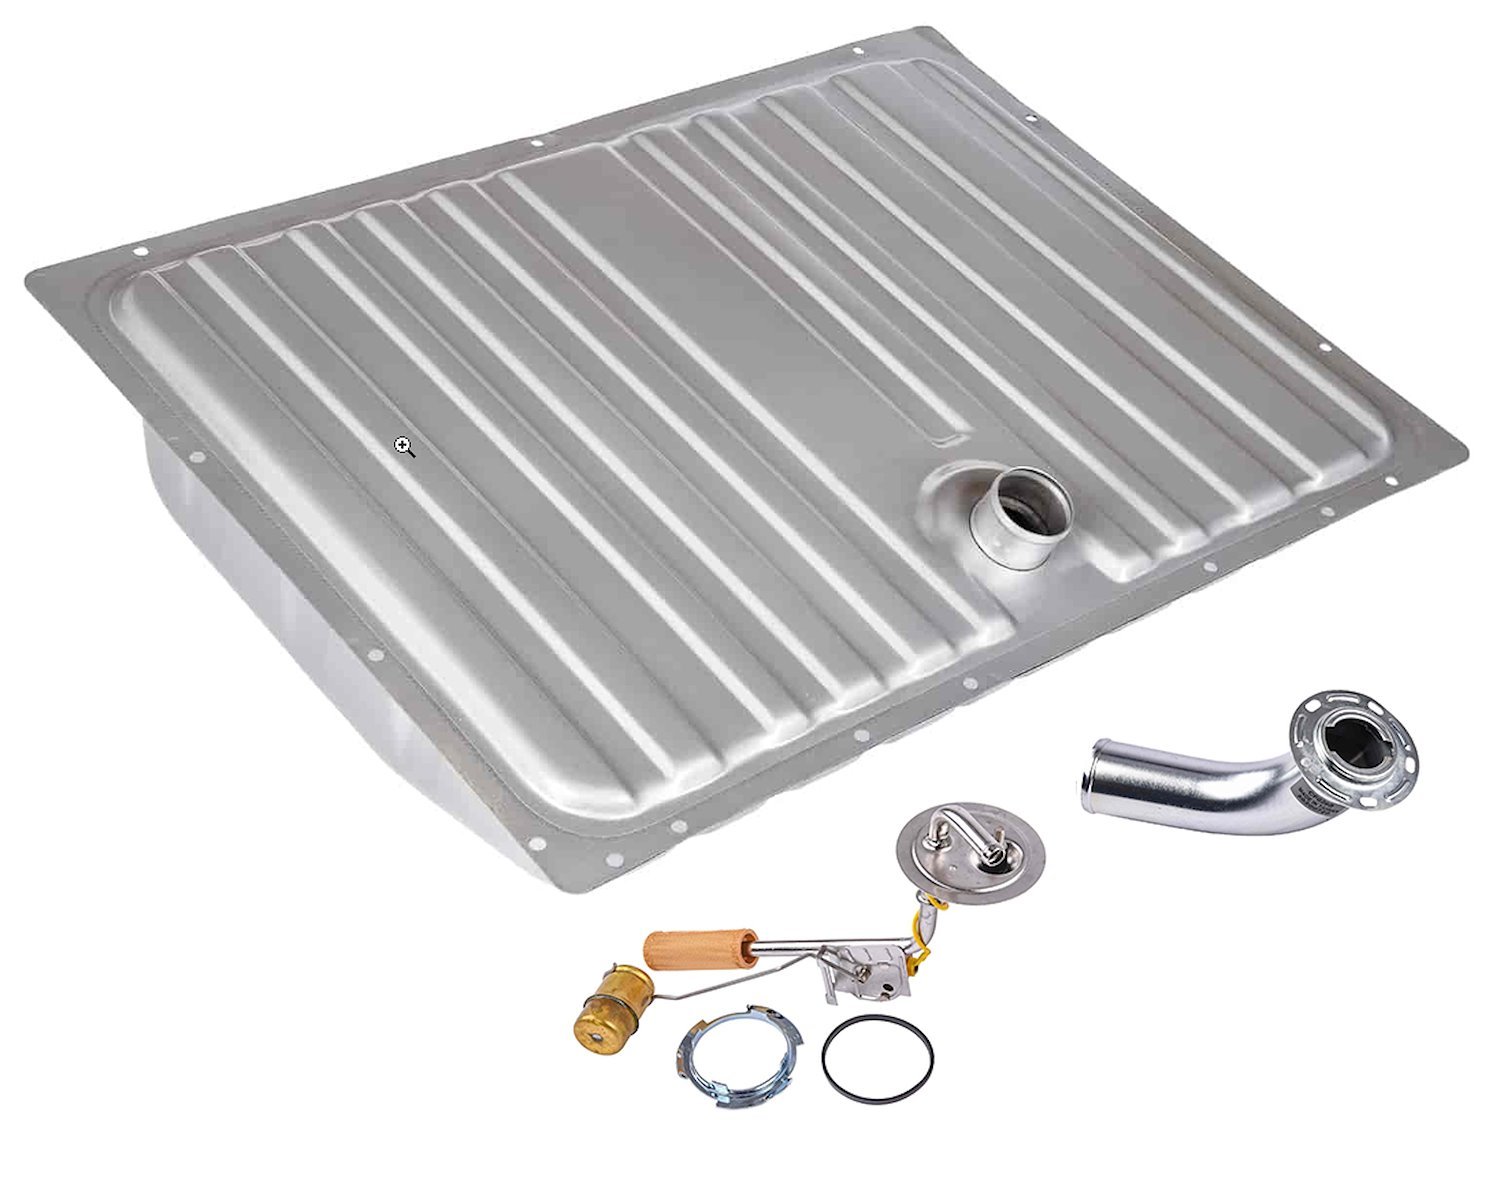 Fuel Tank Kit for 1967-1968 Ford Mustang [16-Gallon]